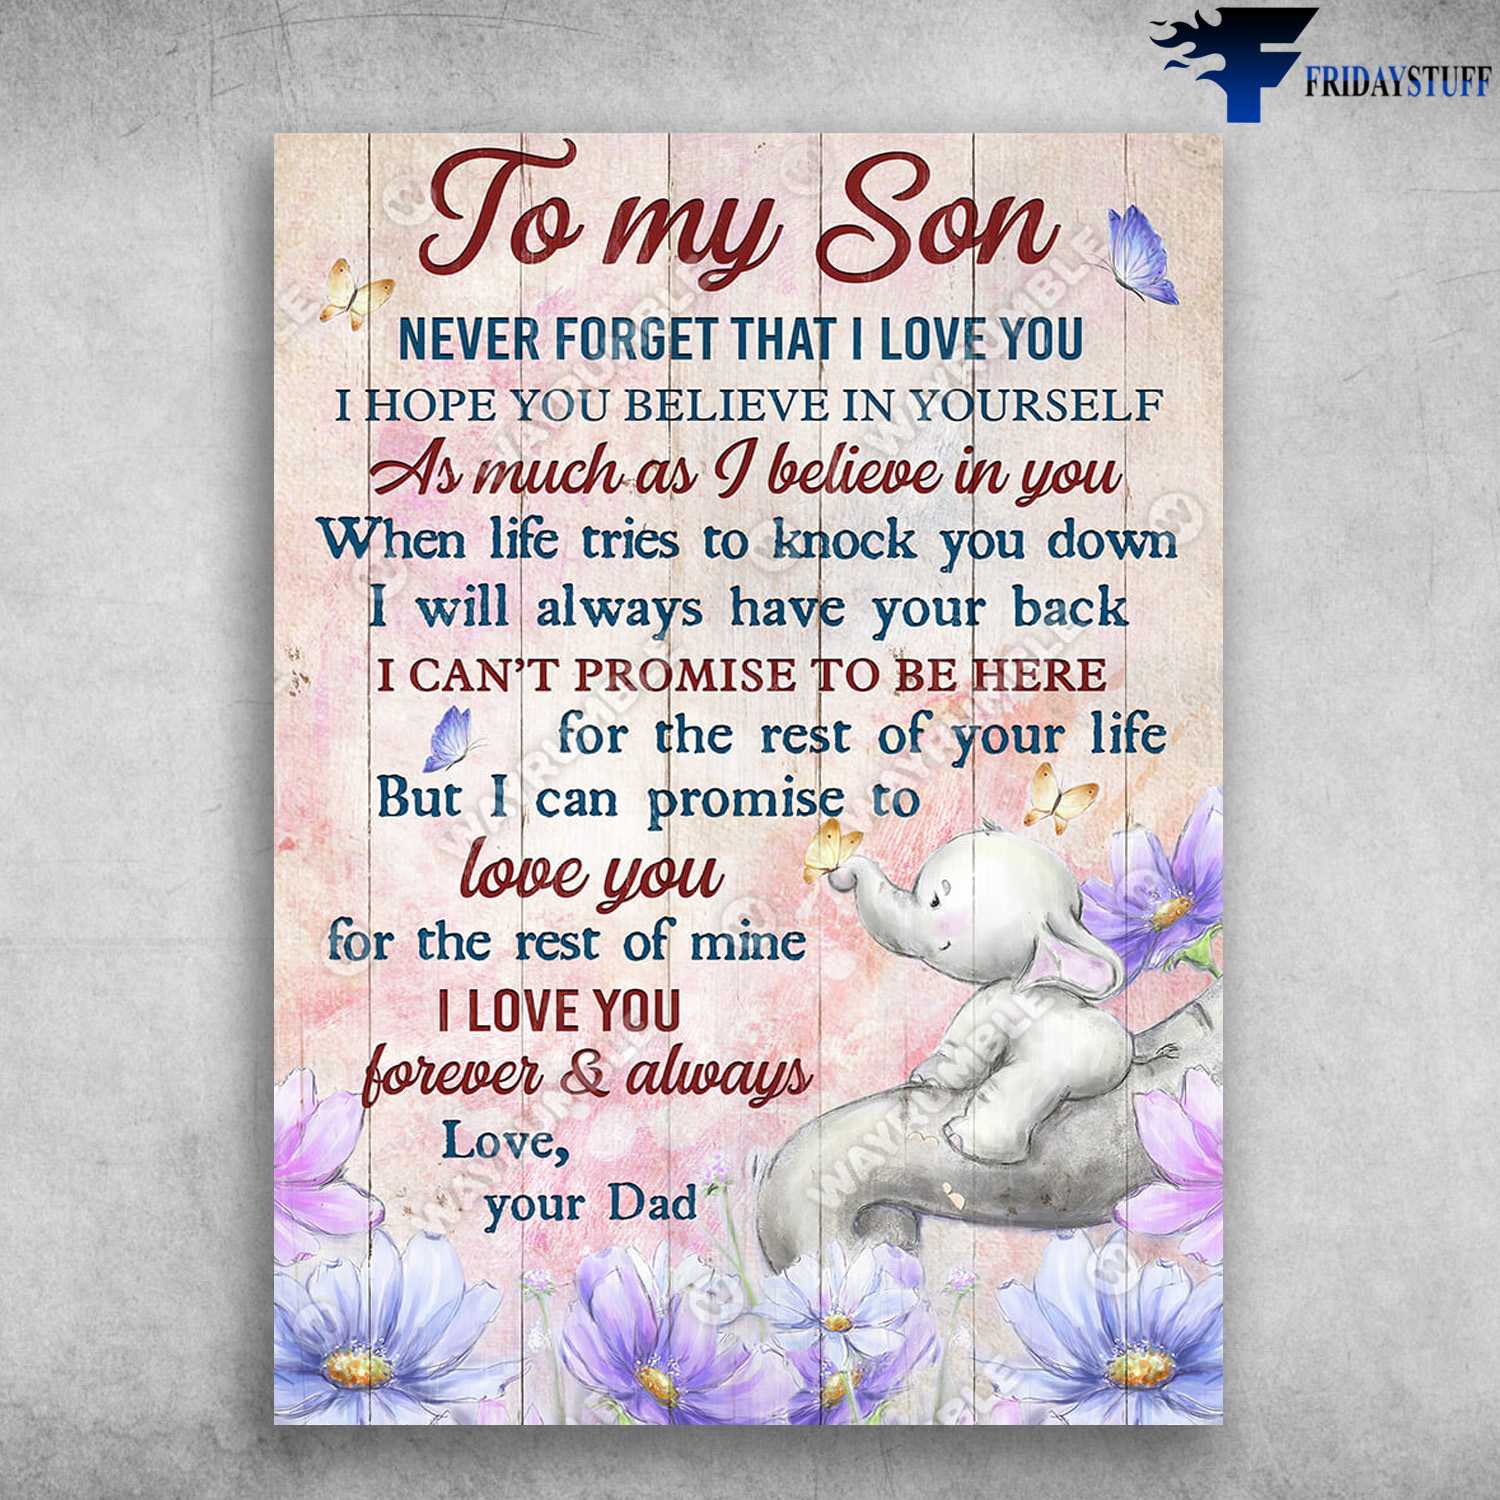 Elephanr Poster, Dad And Son, To My Son, Never Foget That I Love You, I Hope You Believe In Yourself, As Much As I Believe In You